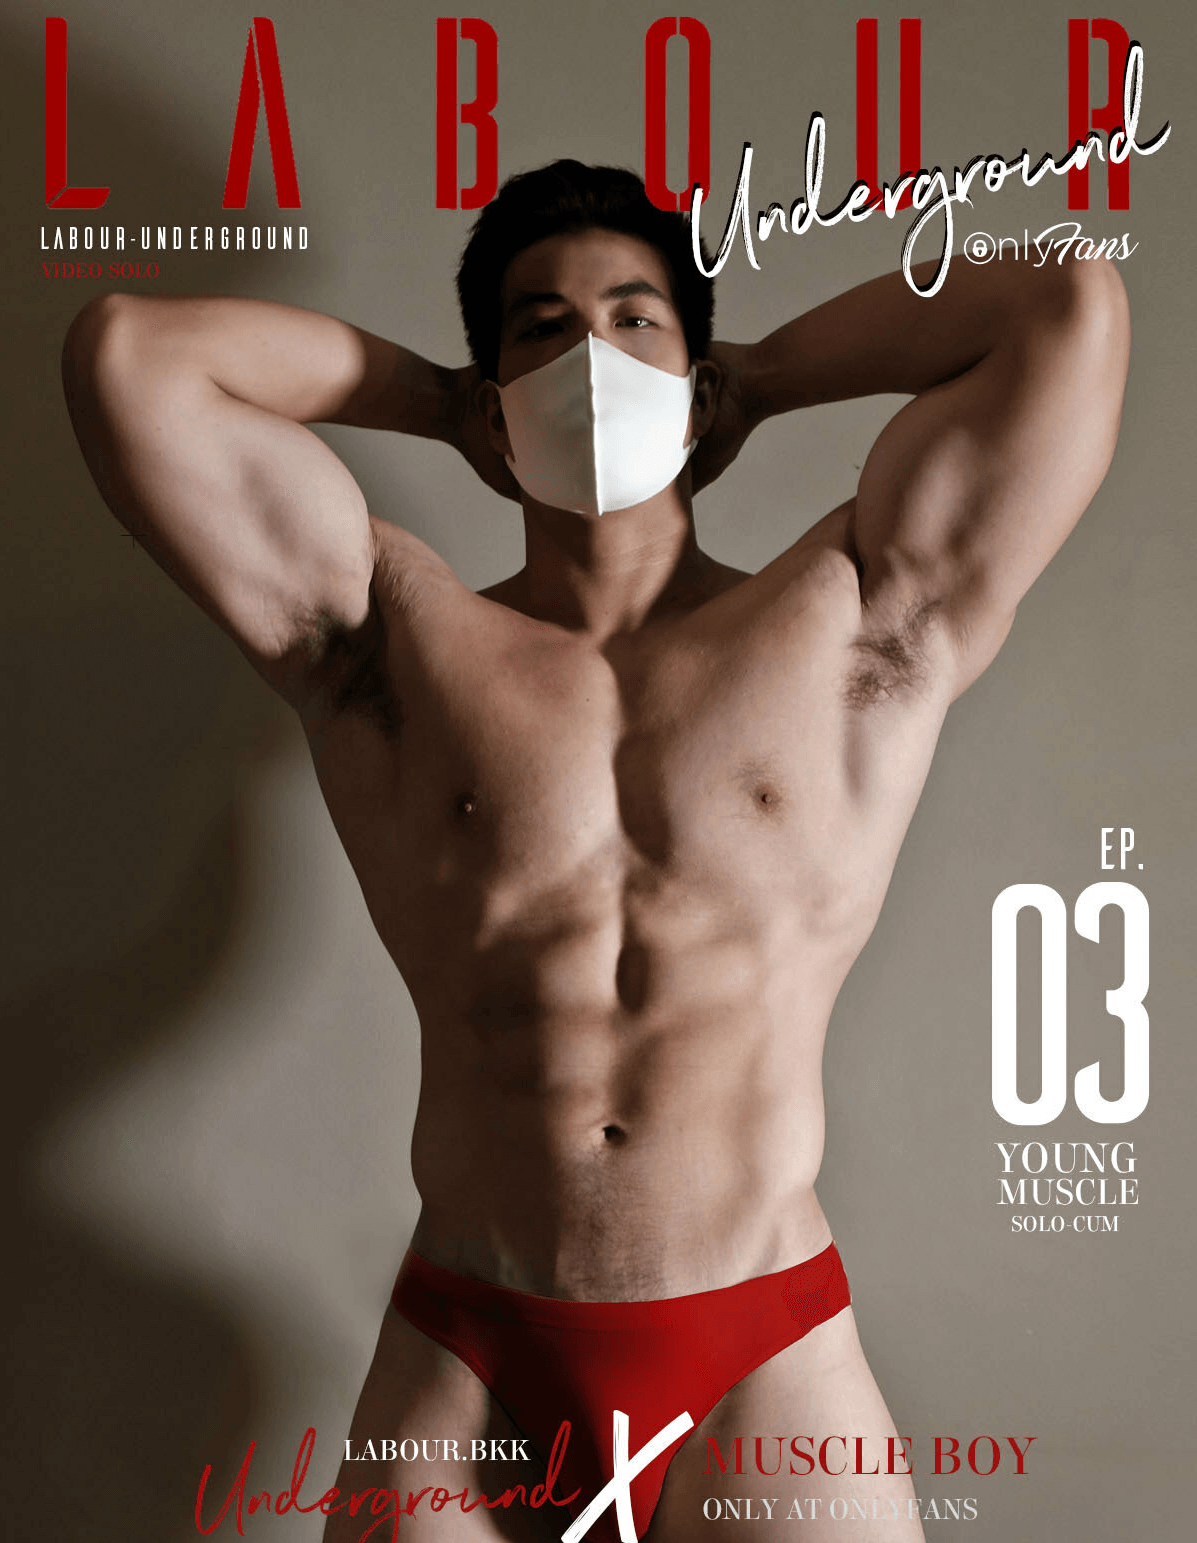 Labour BKK Underground ep.03 | Young Muscle (ebook + cum video)-NICEGAY